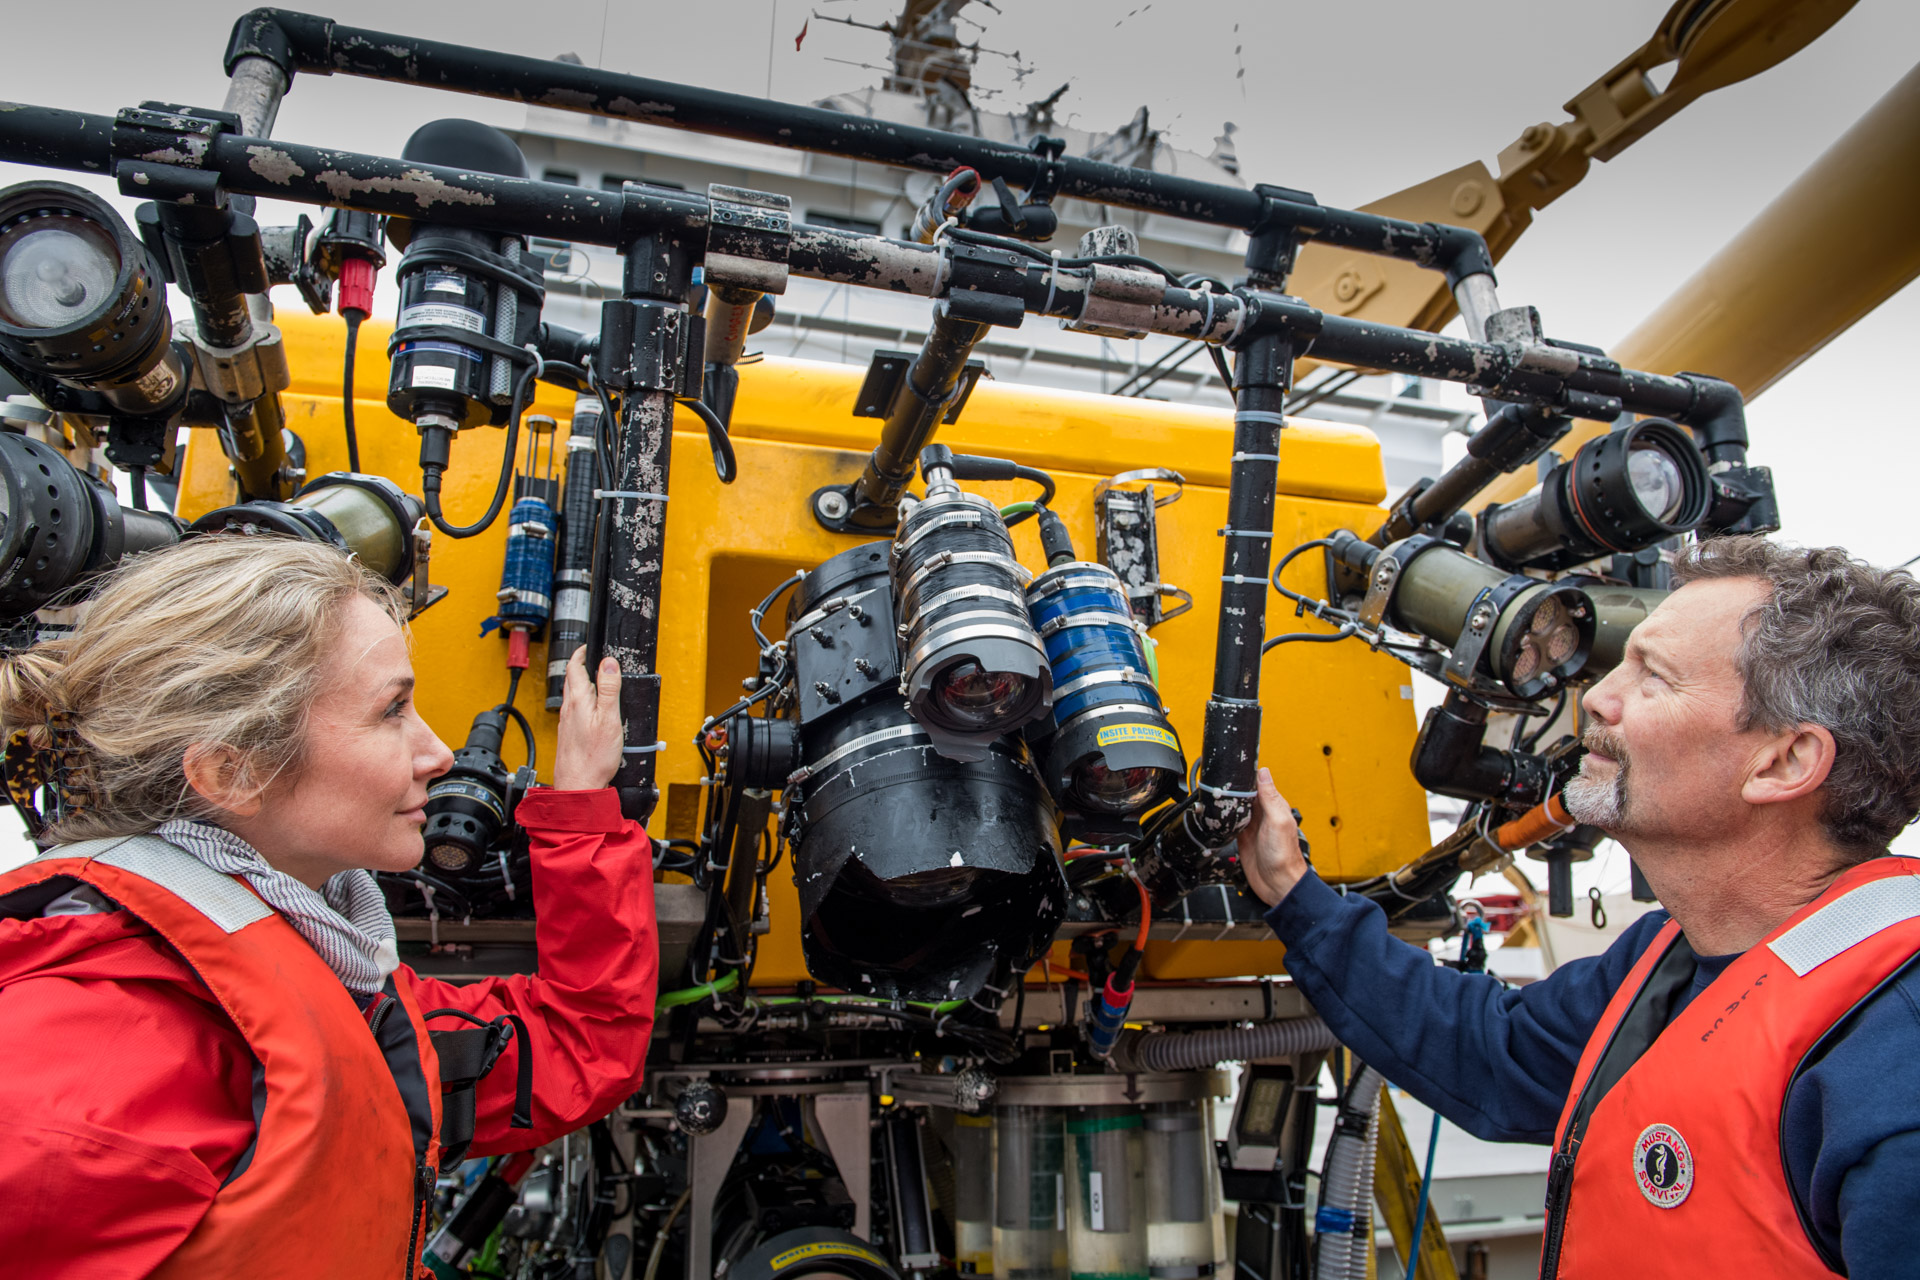 Onboard the Martha L. Black, Robert Rangeley (right), Director of Science at Oceana Canada and Alexandra Cousteau, Senior Oceana Advisor, inspect the ROPOS after a dive. The ROPOS is a state-of-the-art underwater robot that can collect samples and scientific data as well as high definition video while submerged during the Gulf of St. Lawrence Expedition. The expedition is a joint venture between Oceana Canada and Fisheries and Oceans Canada.